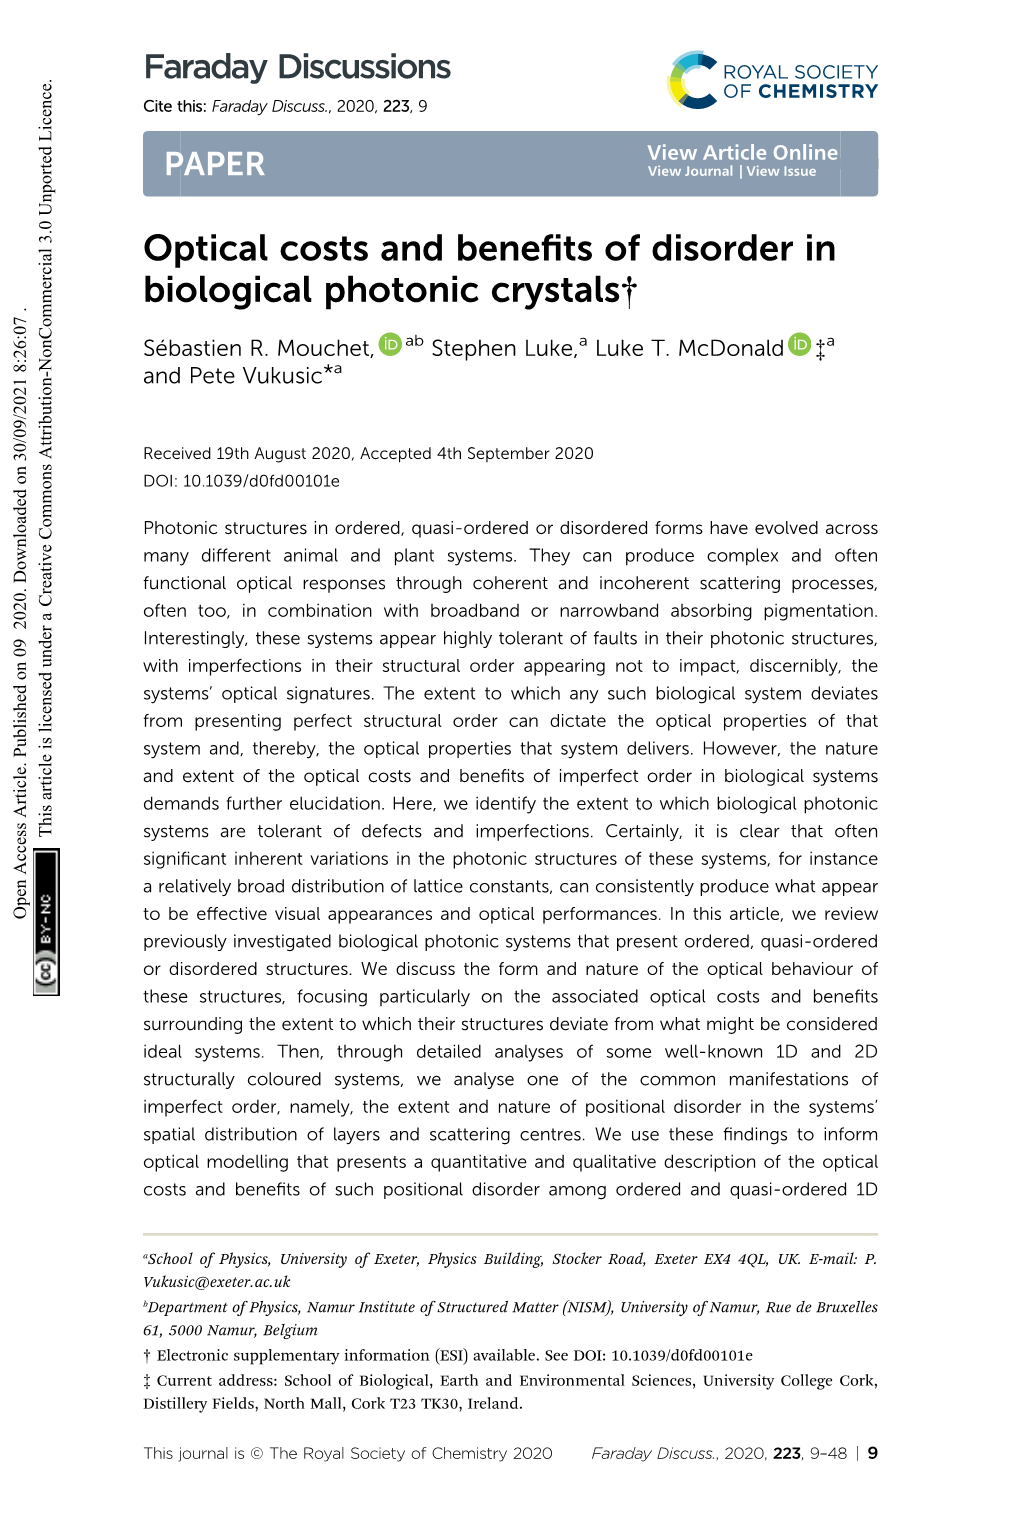 Optical Costs and Benefits of Disorder in Biological Photonic Crystals